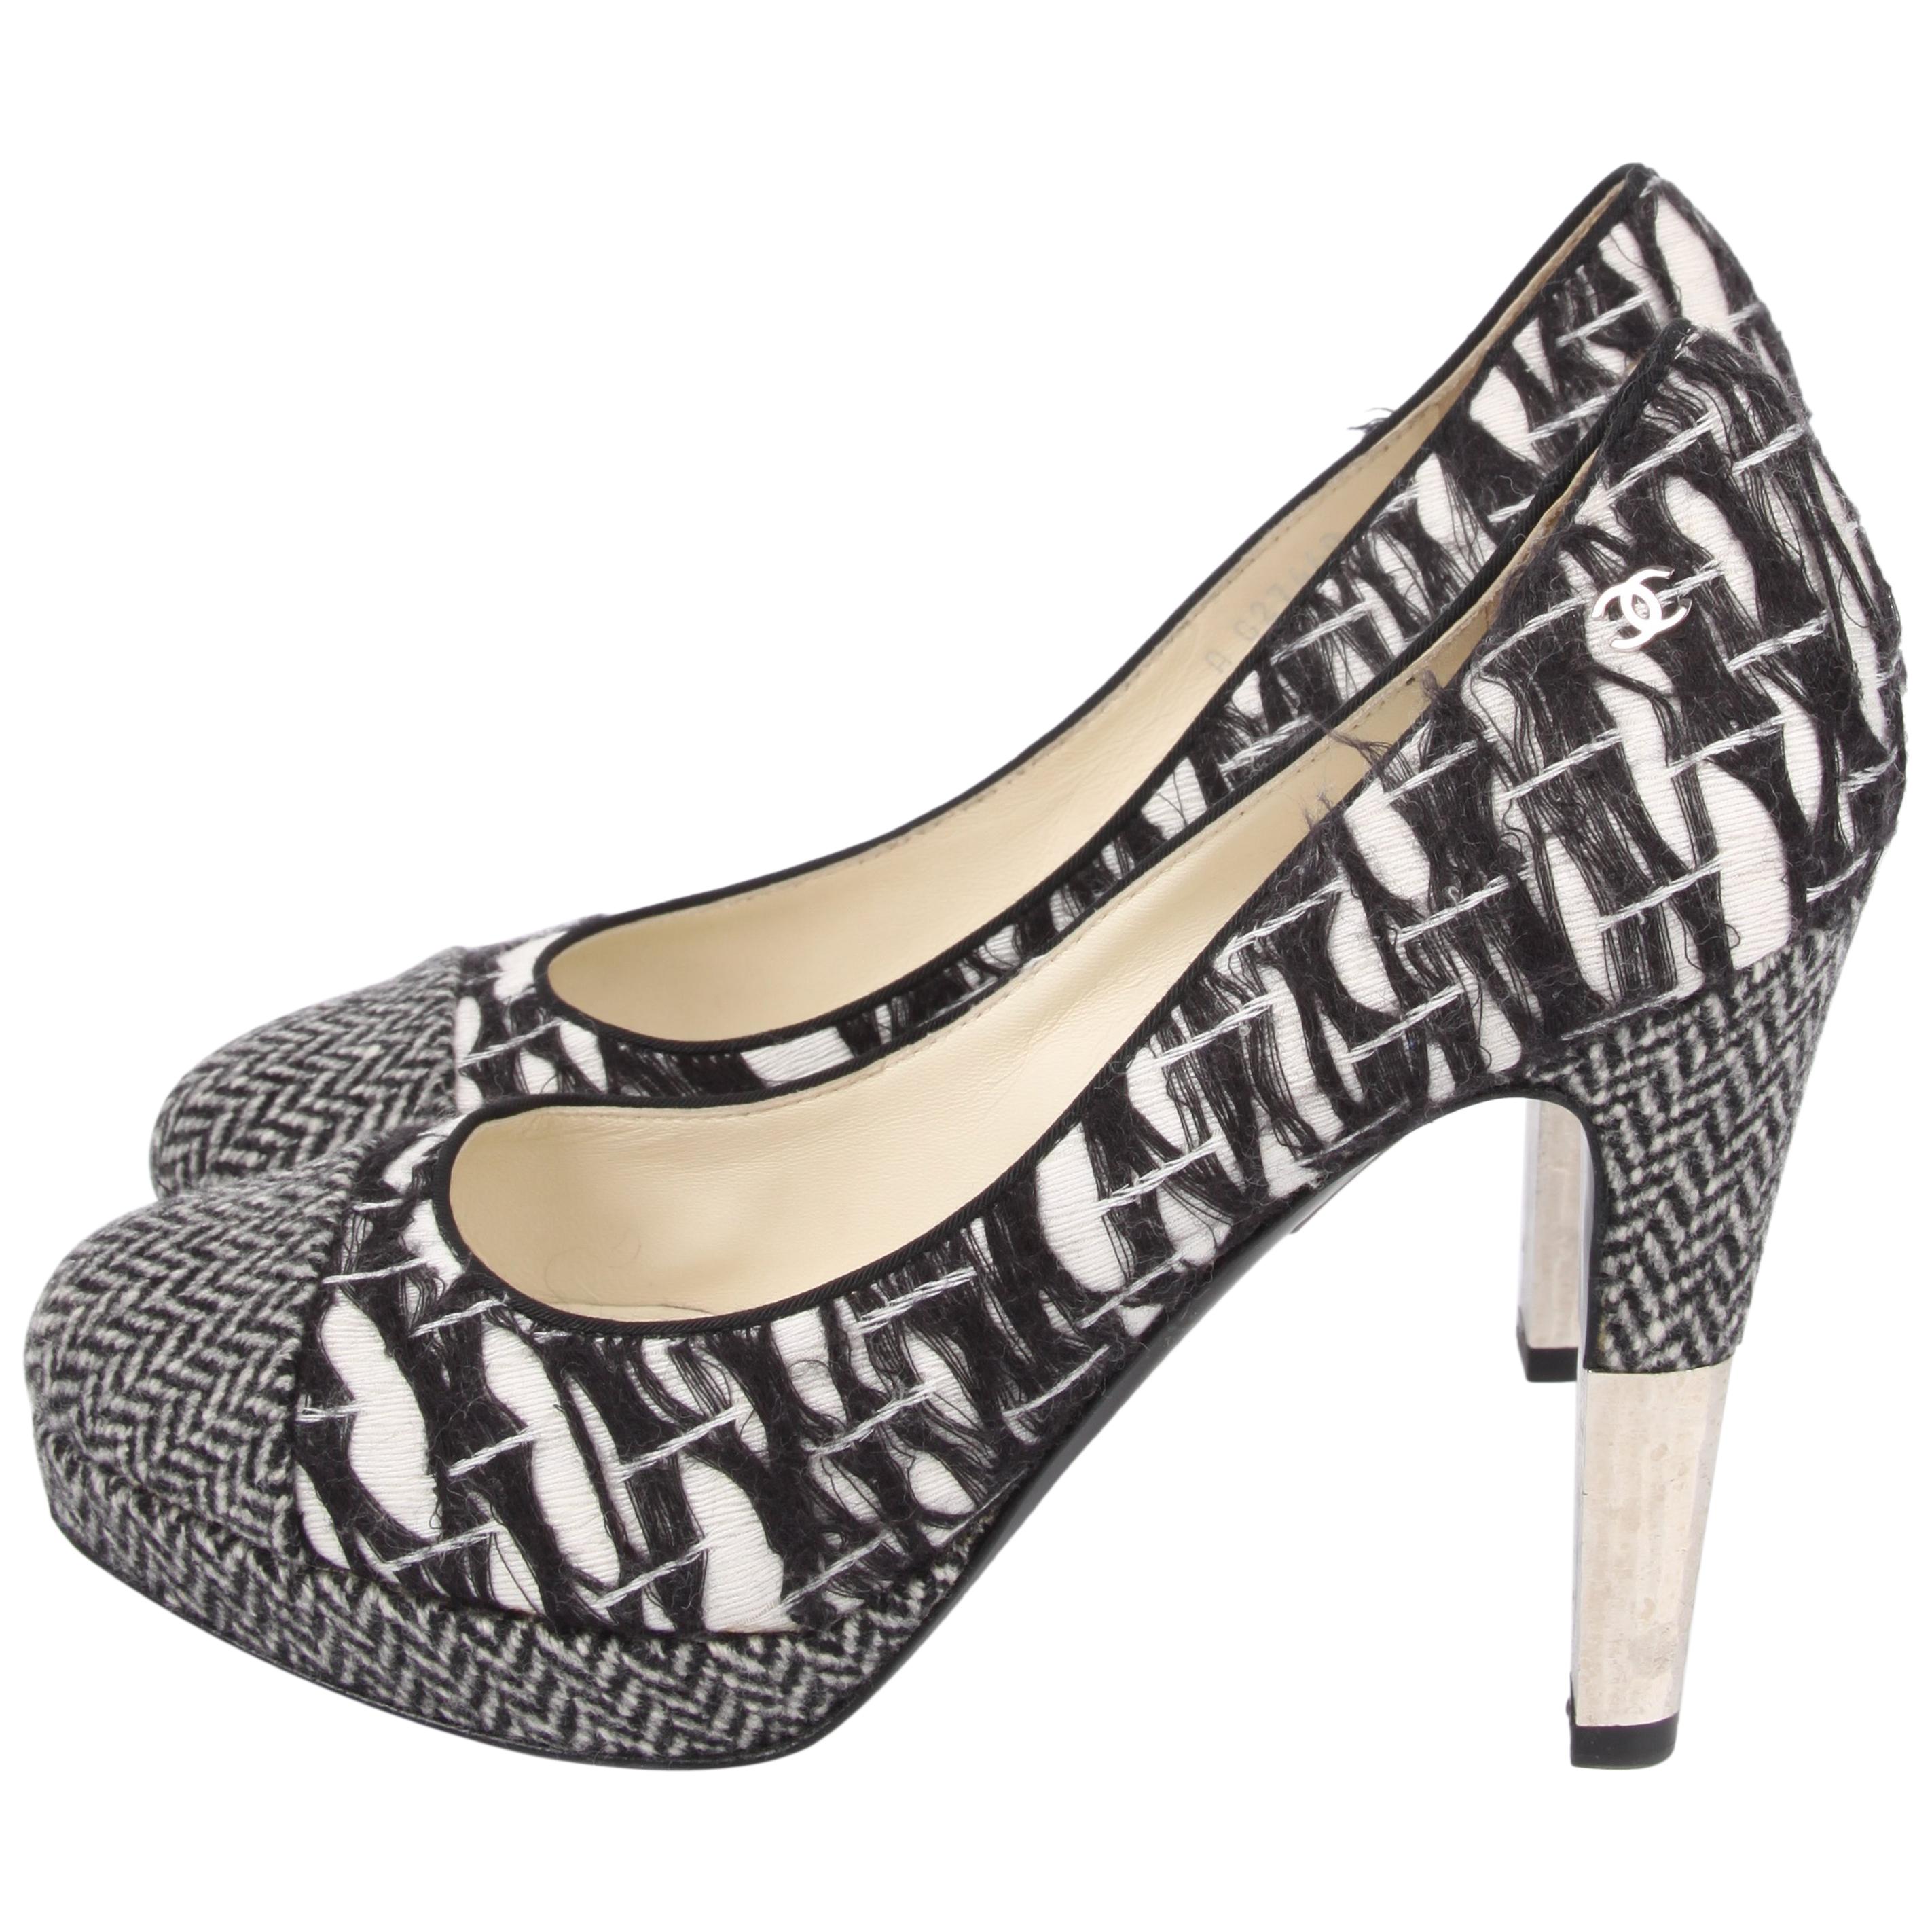 Chanel Tweed Pumps - black & white For Sale